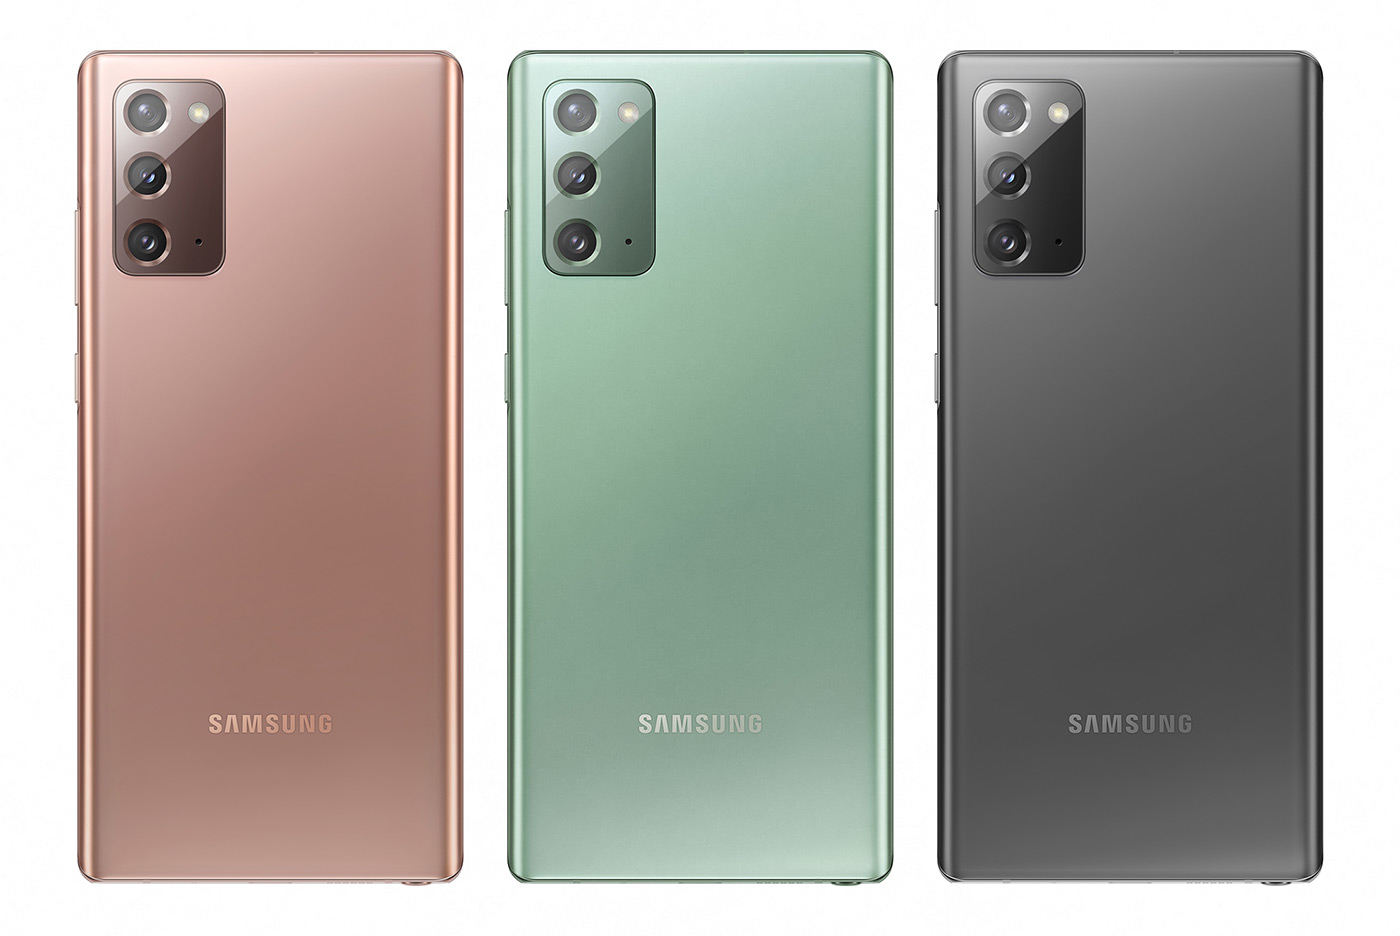 Samsung Unpacked 2020 - smartphones, tablets and accessories